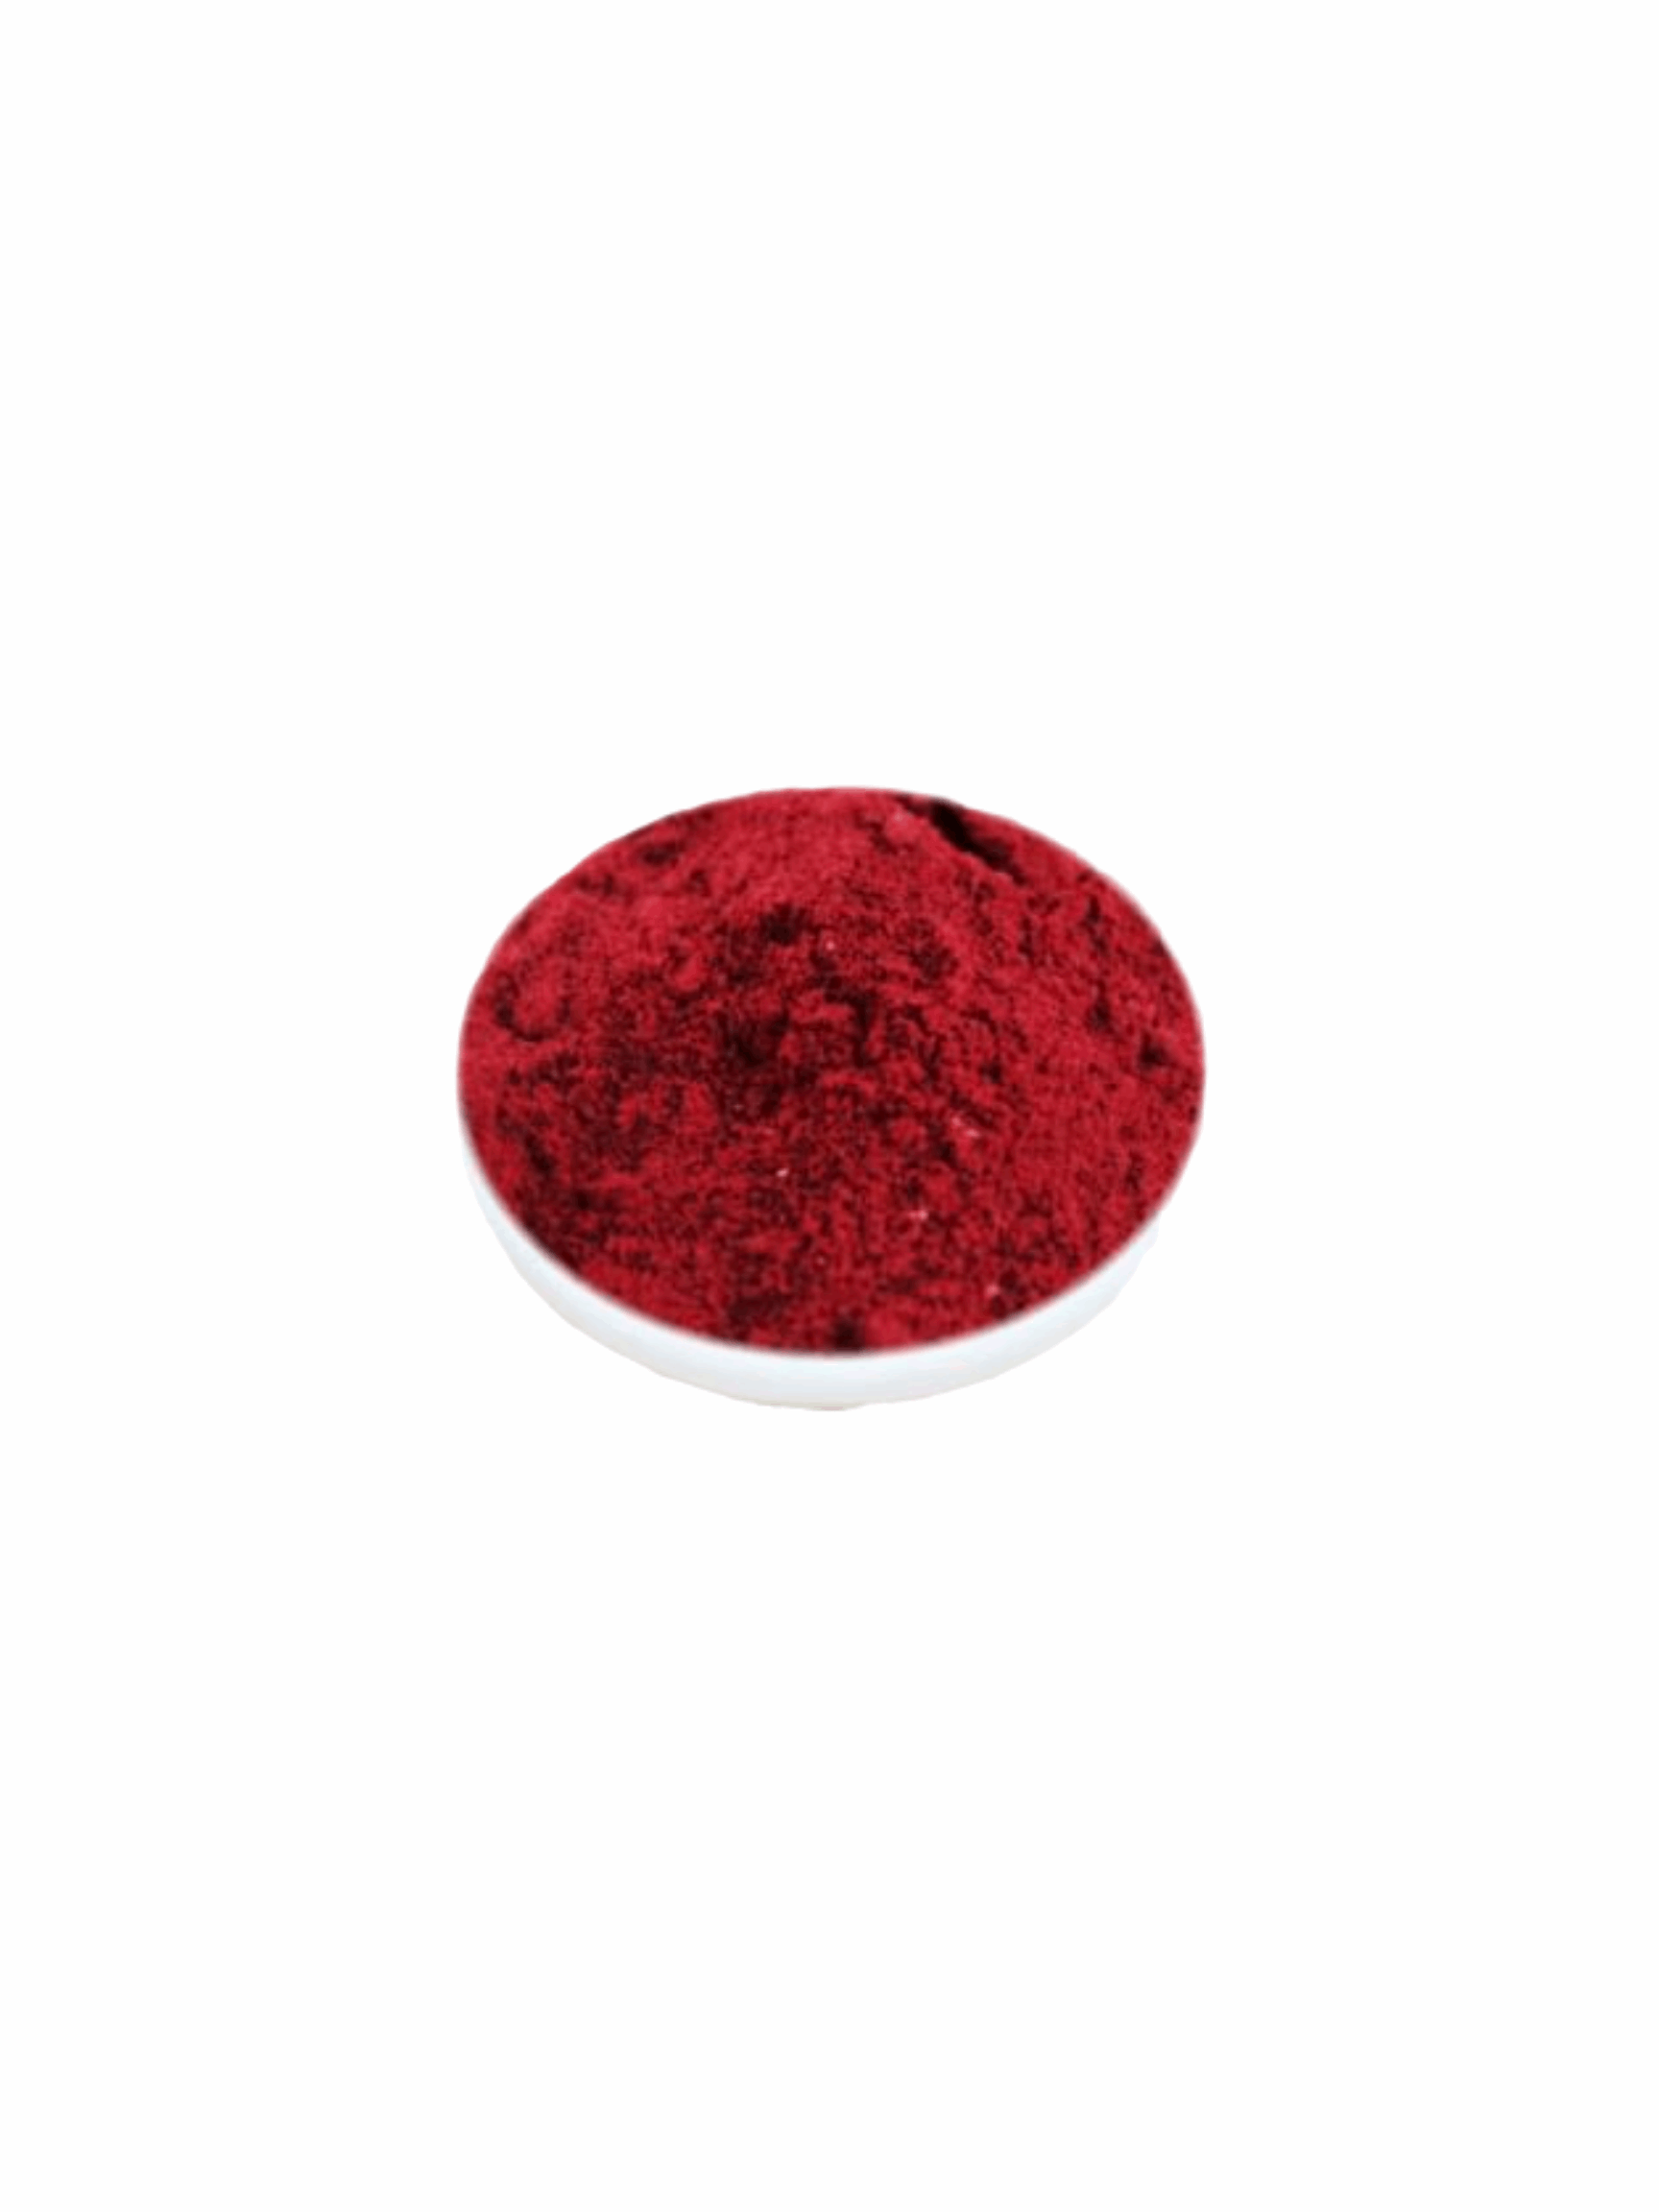 Hibiscus Strengthen Mask - Ebony's Beauty Hair and Skin Care LLC